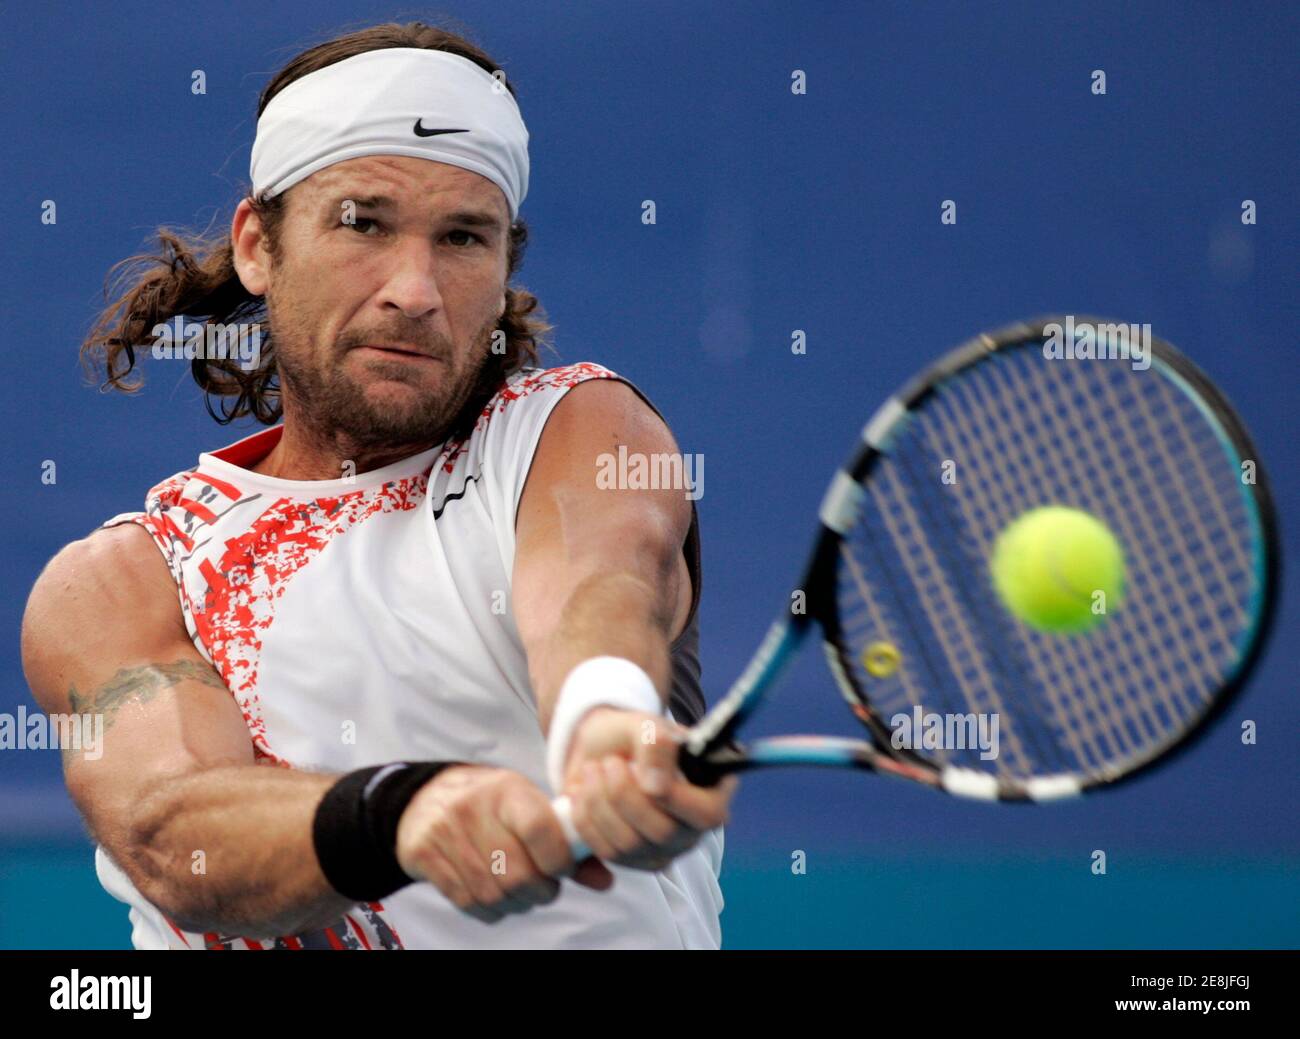 Fifth seed Carlos Moya of Spain hits a backhand during his win over Austria's Stefan Koubek at the Sydney International tennis tournament January 8, 2008. REUTERS/Will Burgess     (AUSTRALIA) Stock Photo